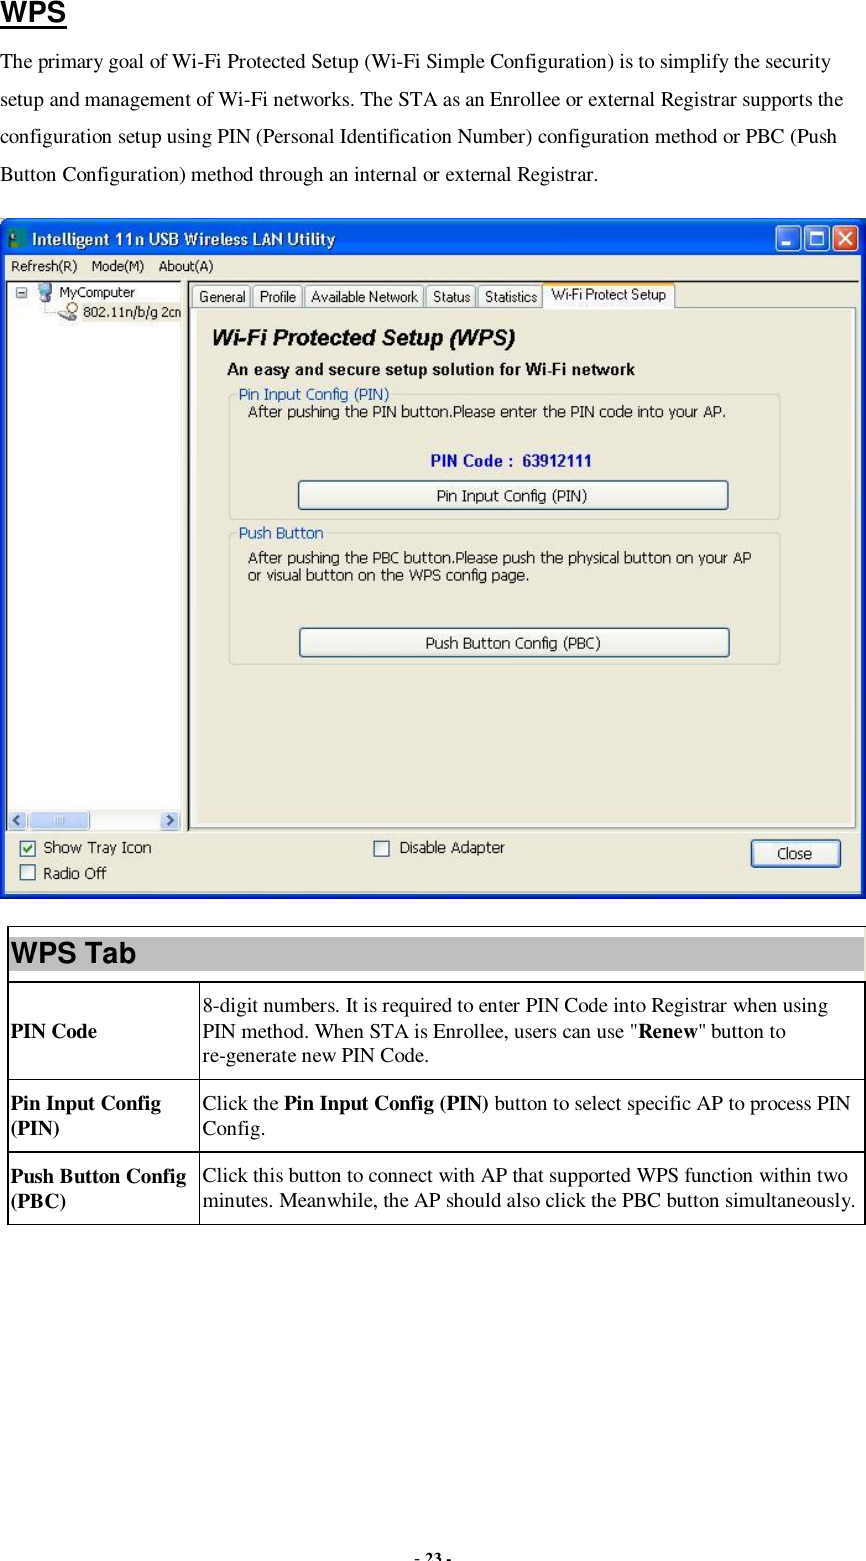  - 23 - WPS The primary goal of Wi-Fi Protected Setup (Wi-Fi Simple Configuration) is to simplify the security setup and management of Wi-Fi networks. The STA as an Enrollee or external Registrar supports the configuration setup using PIN (Personal Identification Number) configuration method or PBC (Push Button Configuration) method through an internal or external Registrar.  WPS Tab PIN Code  8-digit numbers. It is required to enter PIN Code into Registrar when using PIN method. When STA is Enrollee, users can use &quot;Renew&quot; button to re-generate new PIN Code. Pin Input Config (PIN)  Click the Pin Input Config (PIN) button to select specific AP to process PIN Config. Push Button Config (PBC)  Click this button to connect with AP that supported WPS function within two minutes. Meanwhile, the AP should also click the PBC button simultaneously.  